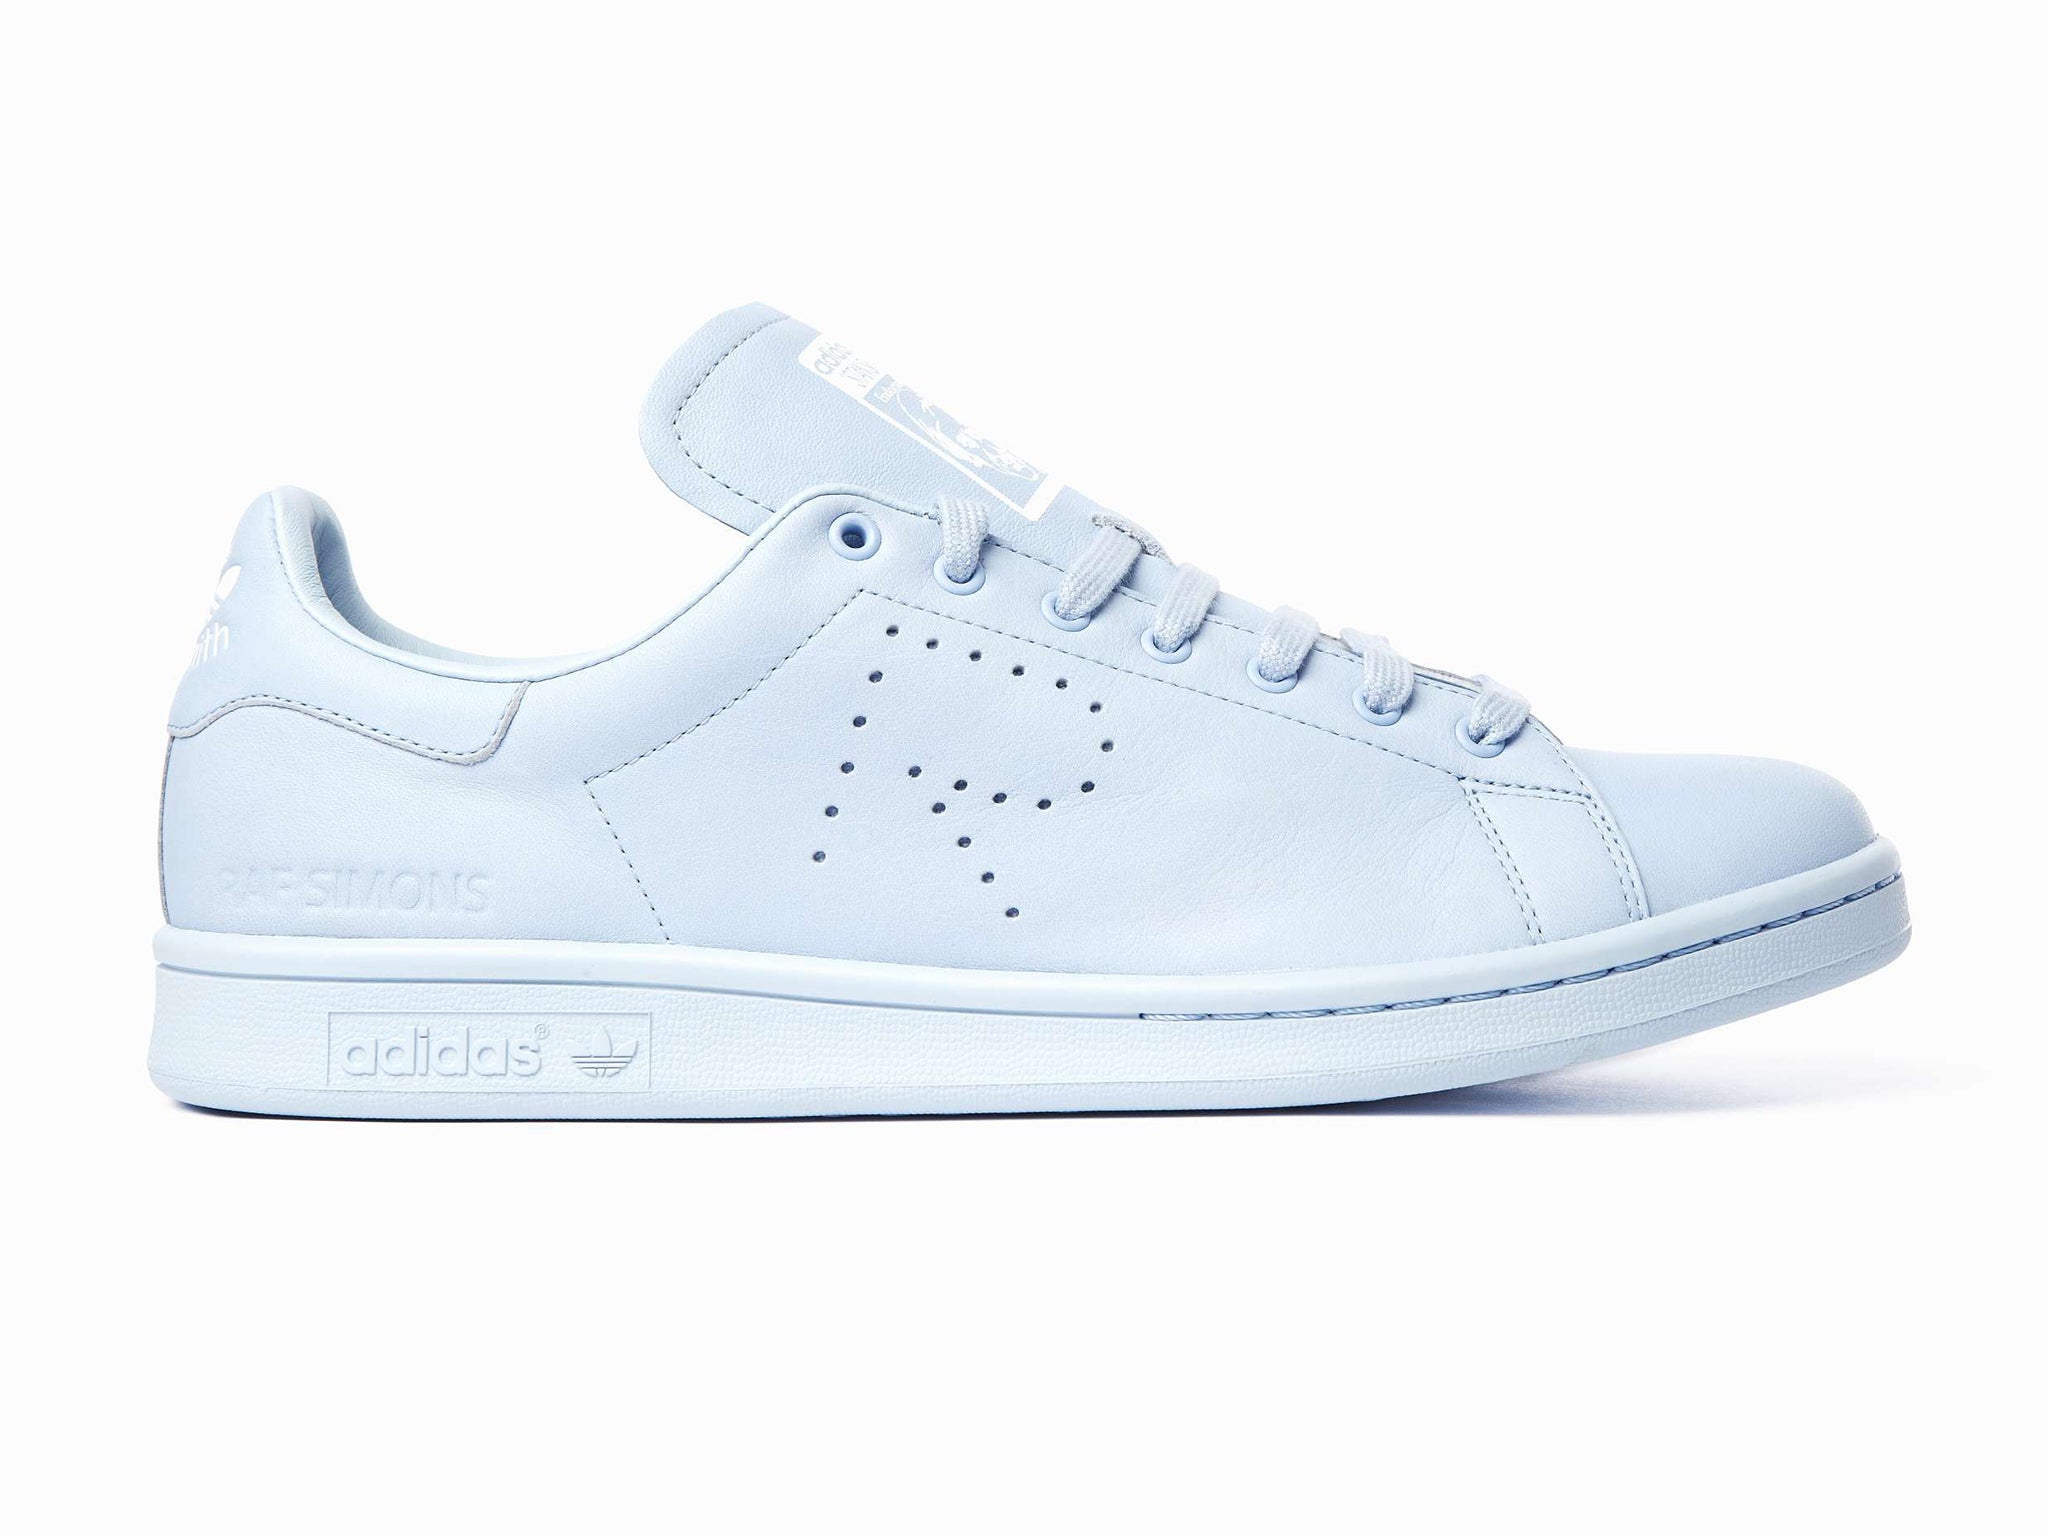 The most fashionable shoe of the moment, I think, is the Adidas Stan Smith